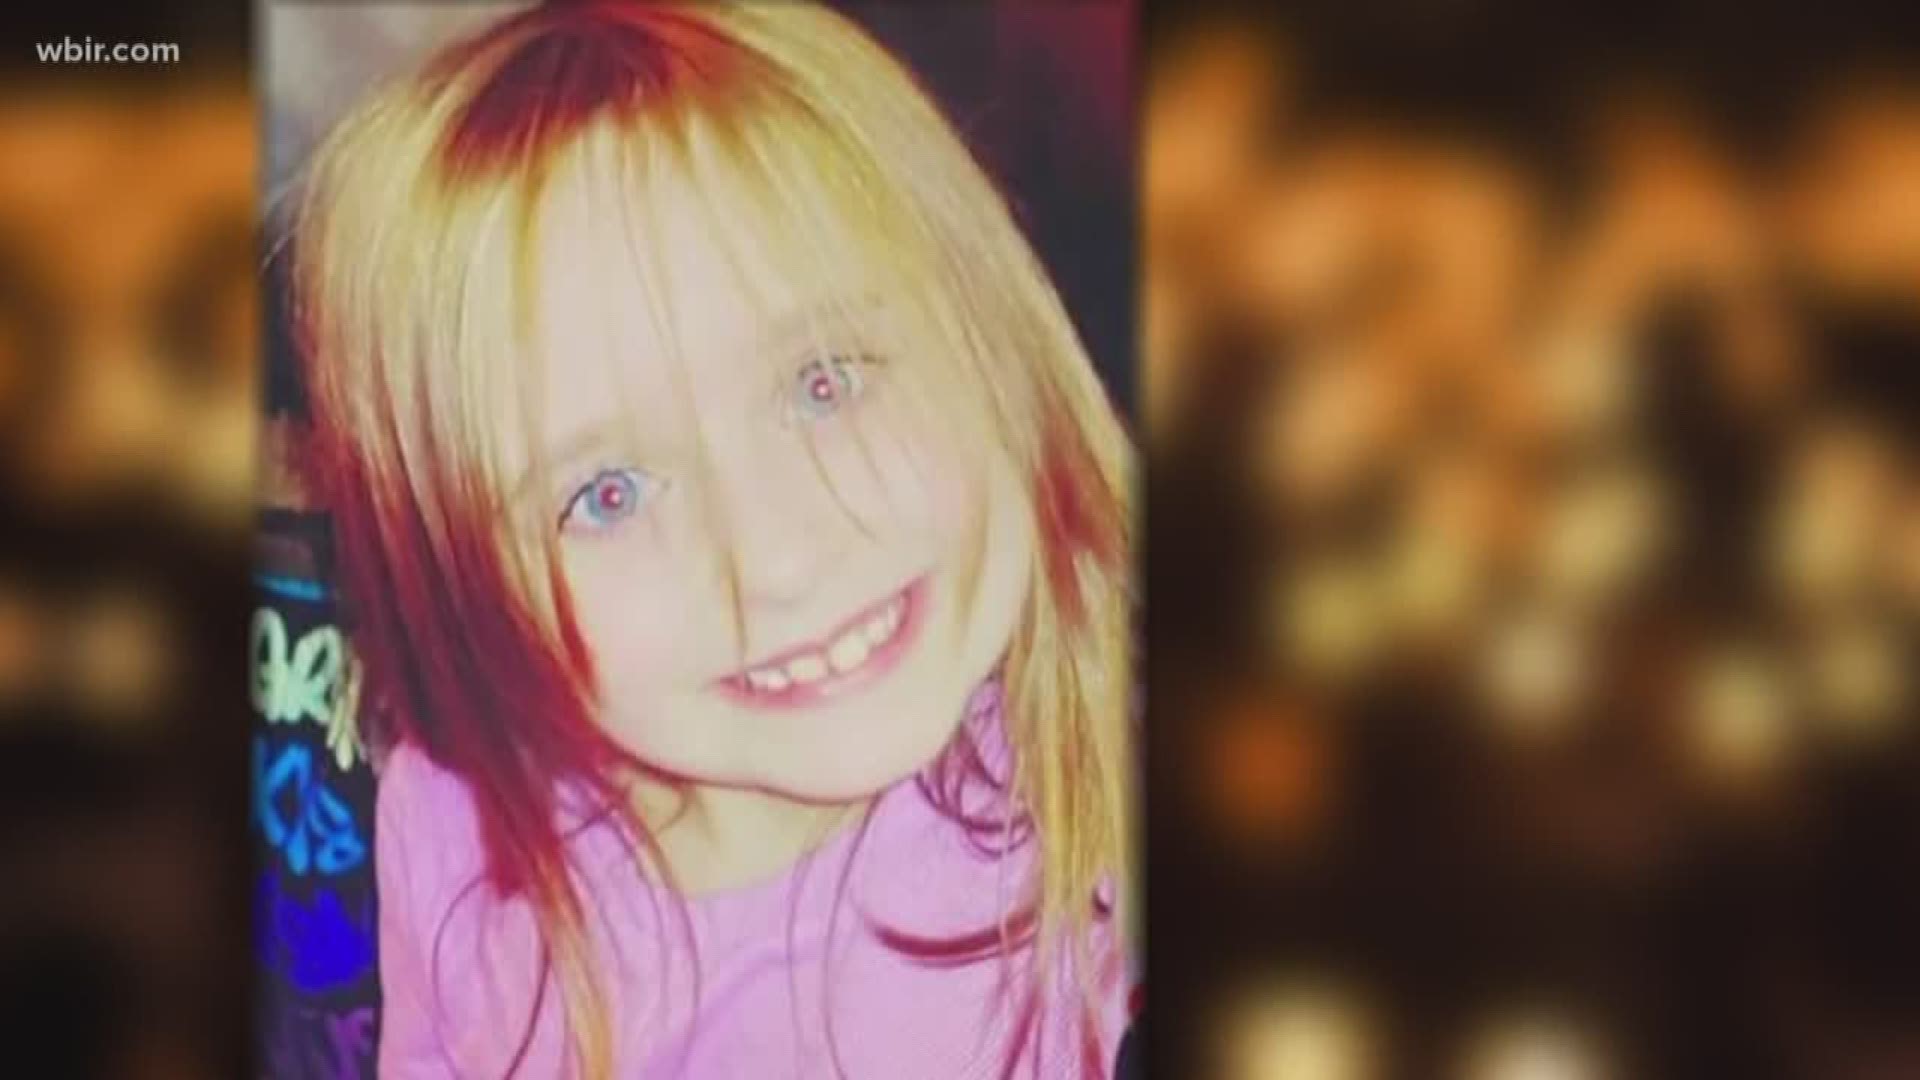 The autopsy on six-year-old Faye Swetlik is now complete in South Carolina.